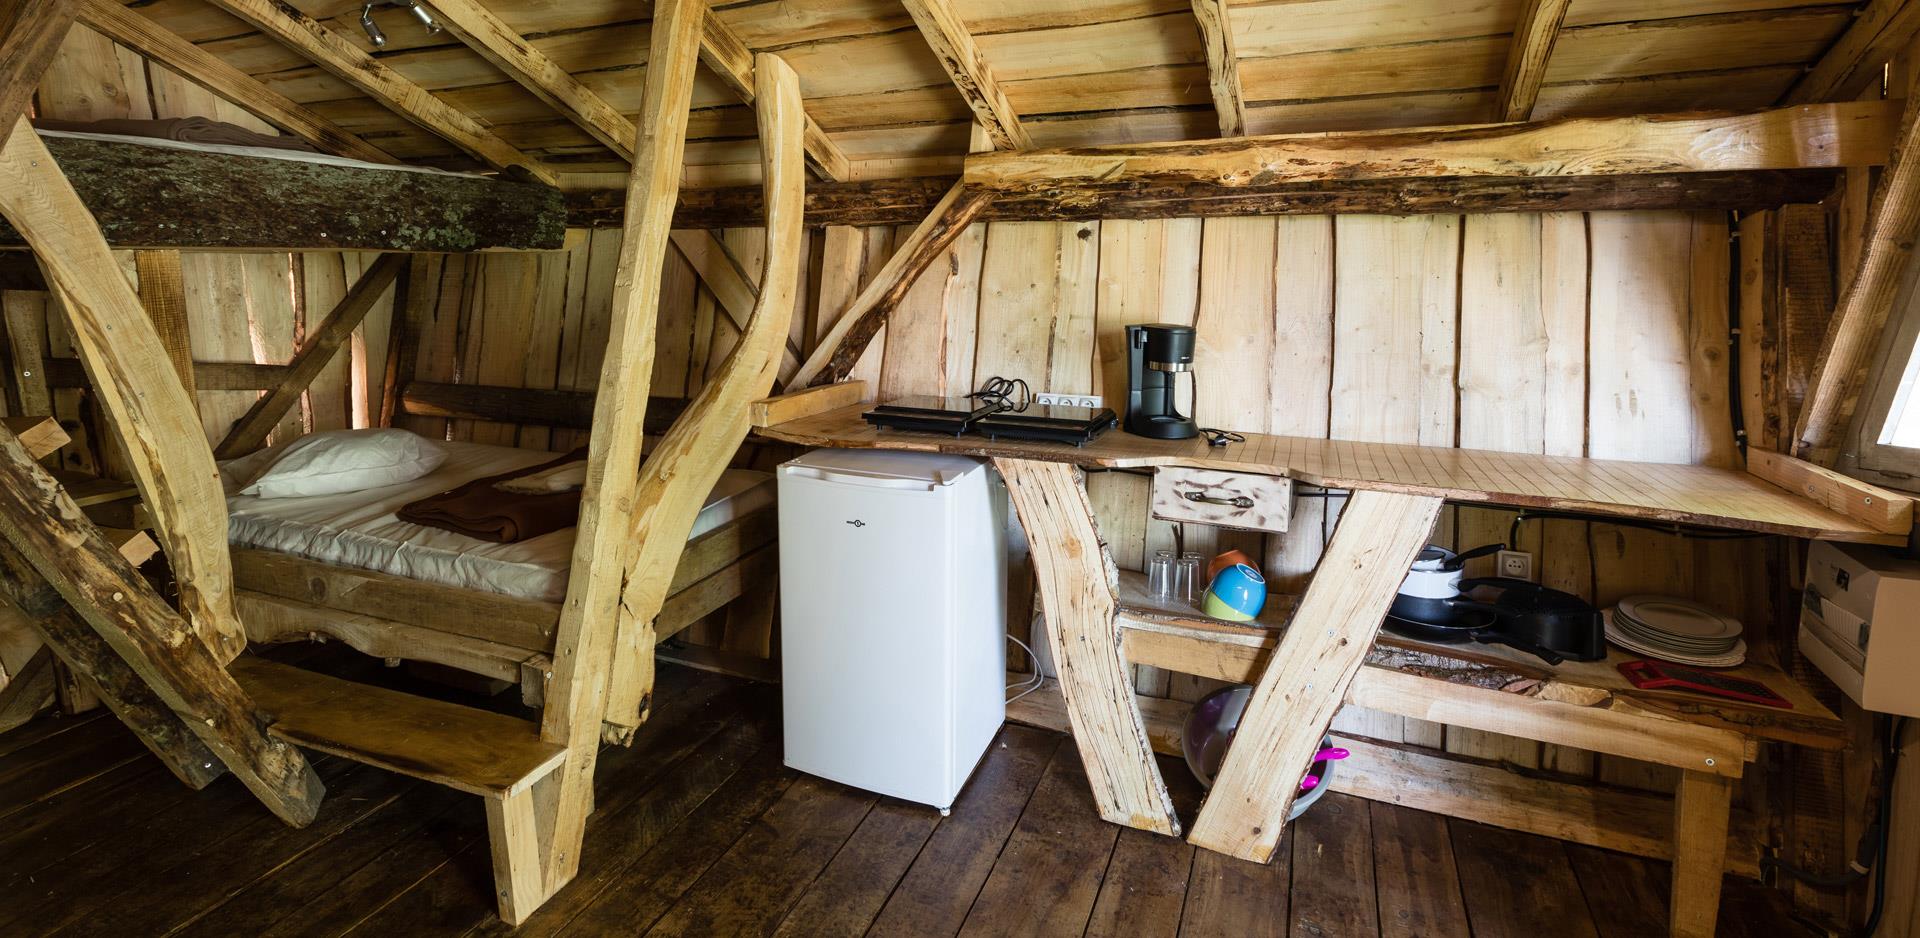 Rental of atypical accommodations in Alsace: view of a kitchen area of a wooden cabin